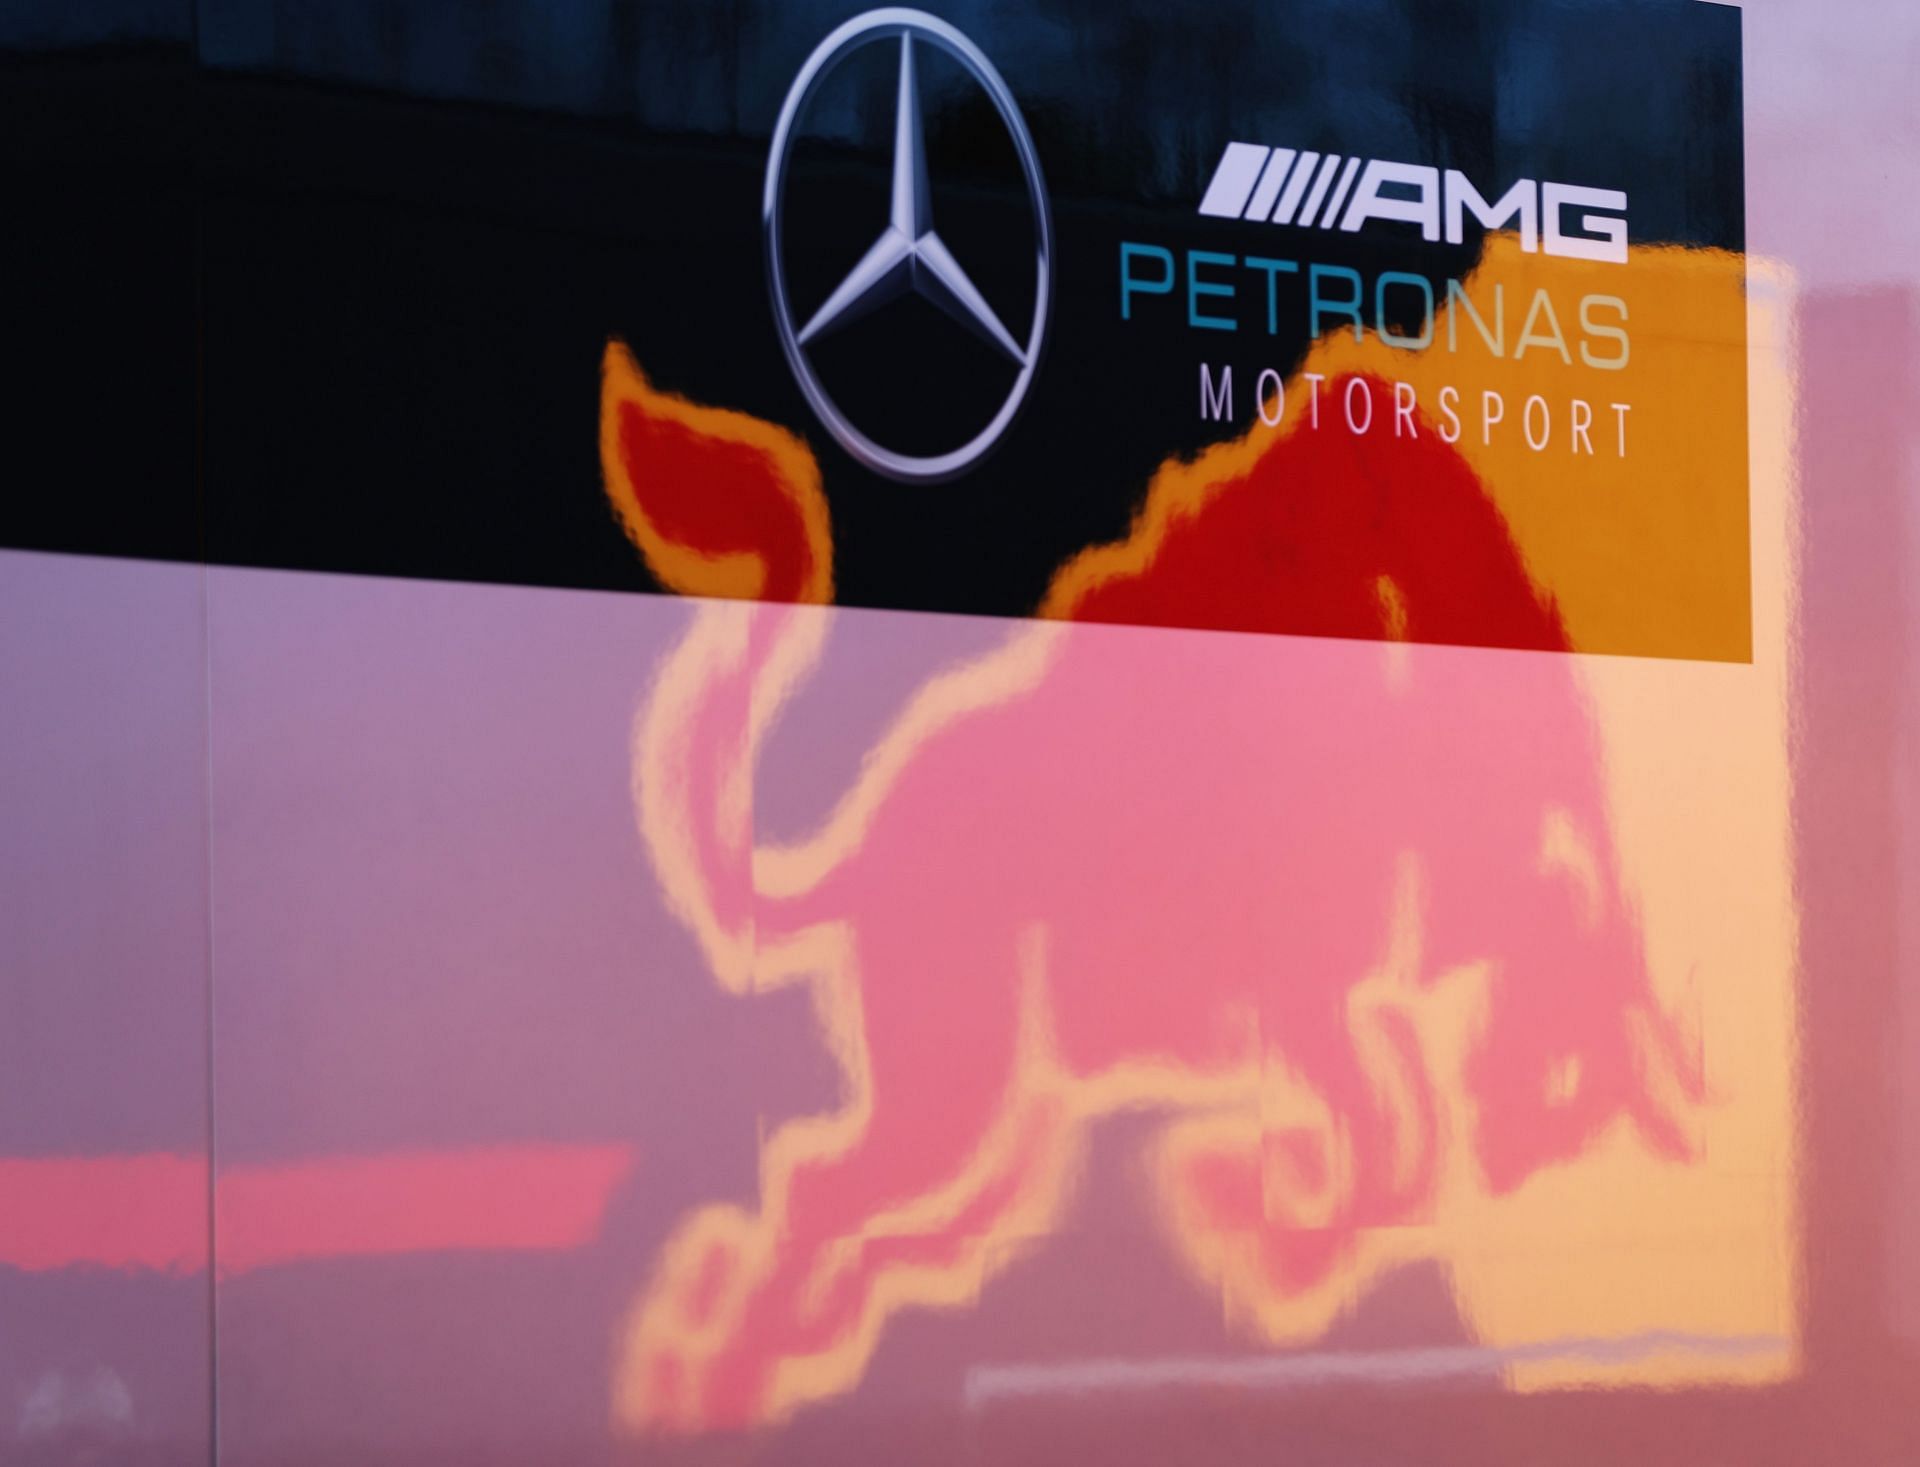 The Red Bull Racing logo reflected in the a truck of the Mercedes GP team at a preseason test in Spain. (Photo by Mark Thompson/Getty Images)